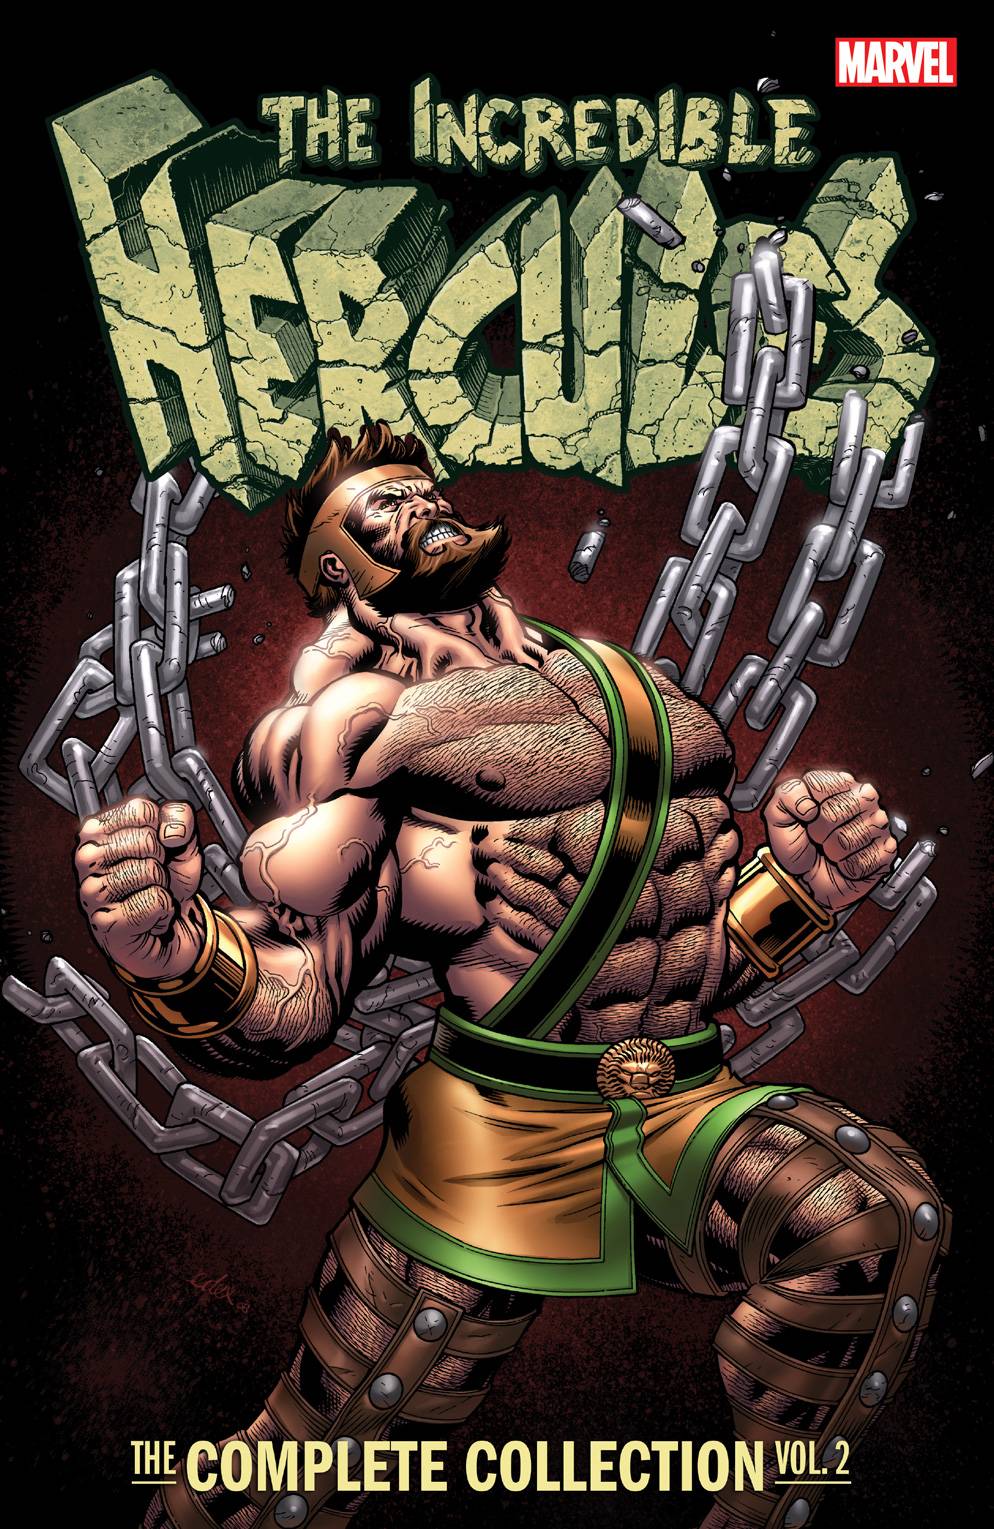 Incredible Hercules Complete Collection Graphic Novel Volume 2